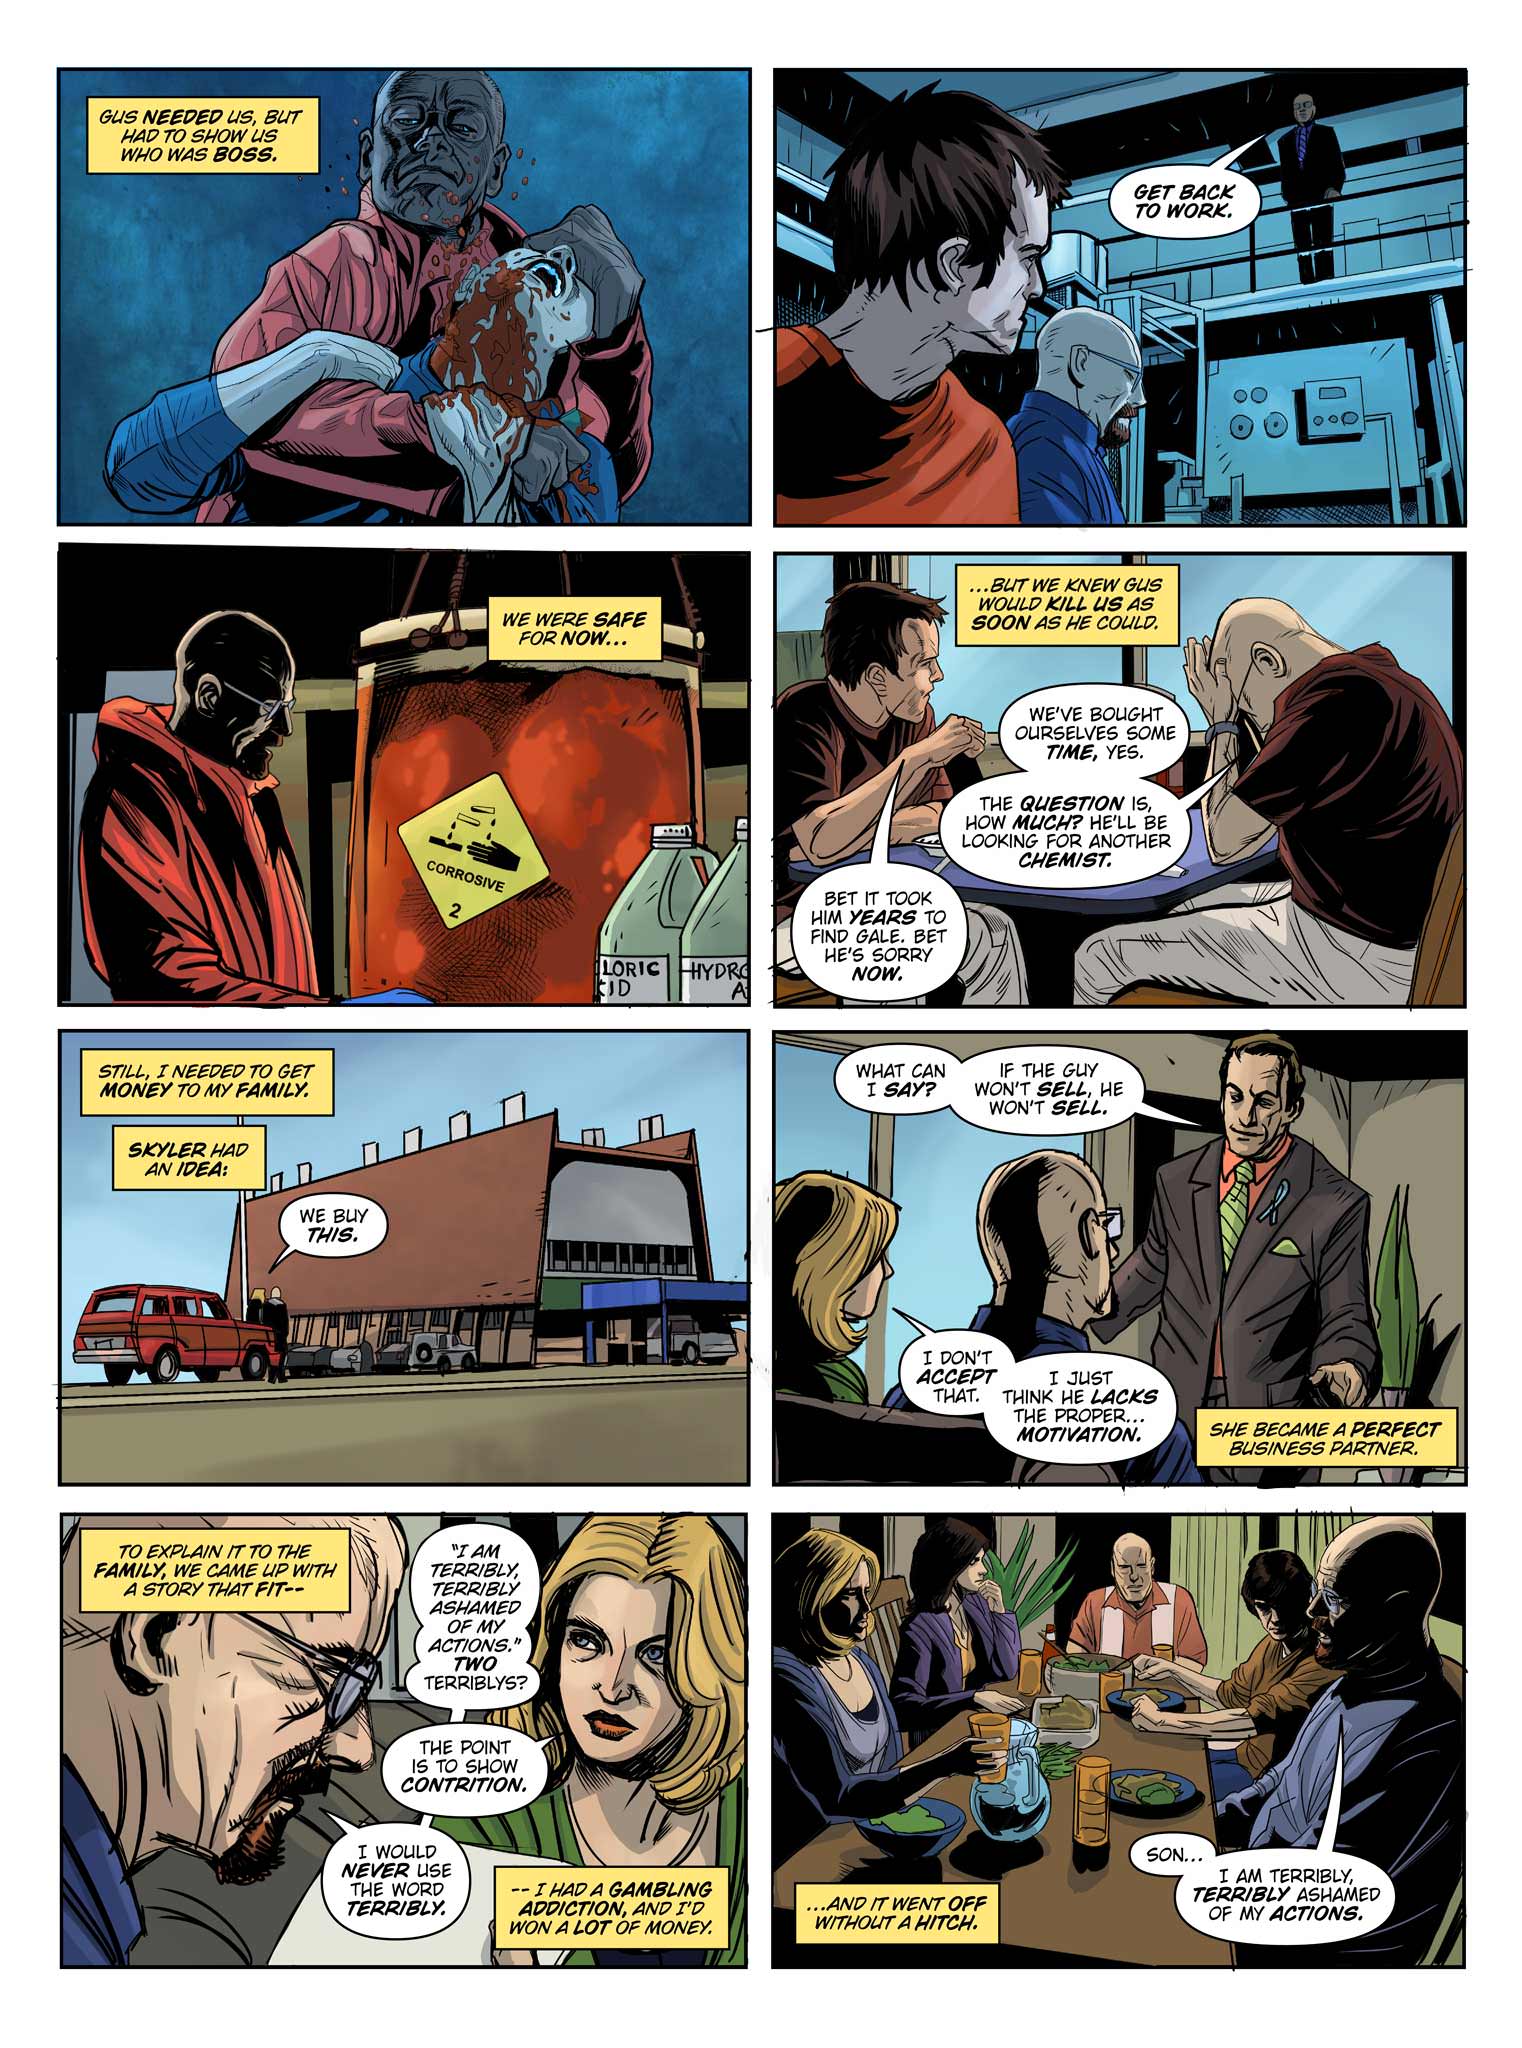 Read online Breaking Bad: All Bad Things comic -  Issue # Full - 14